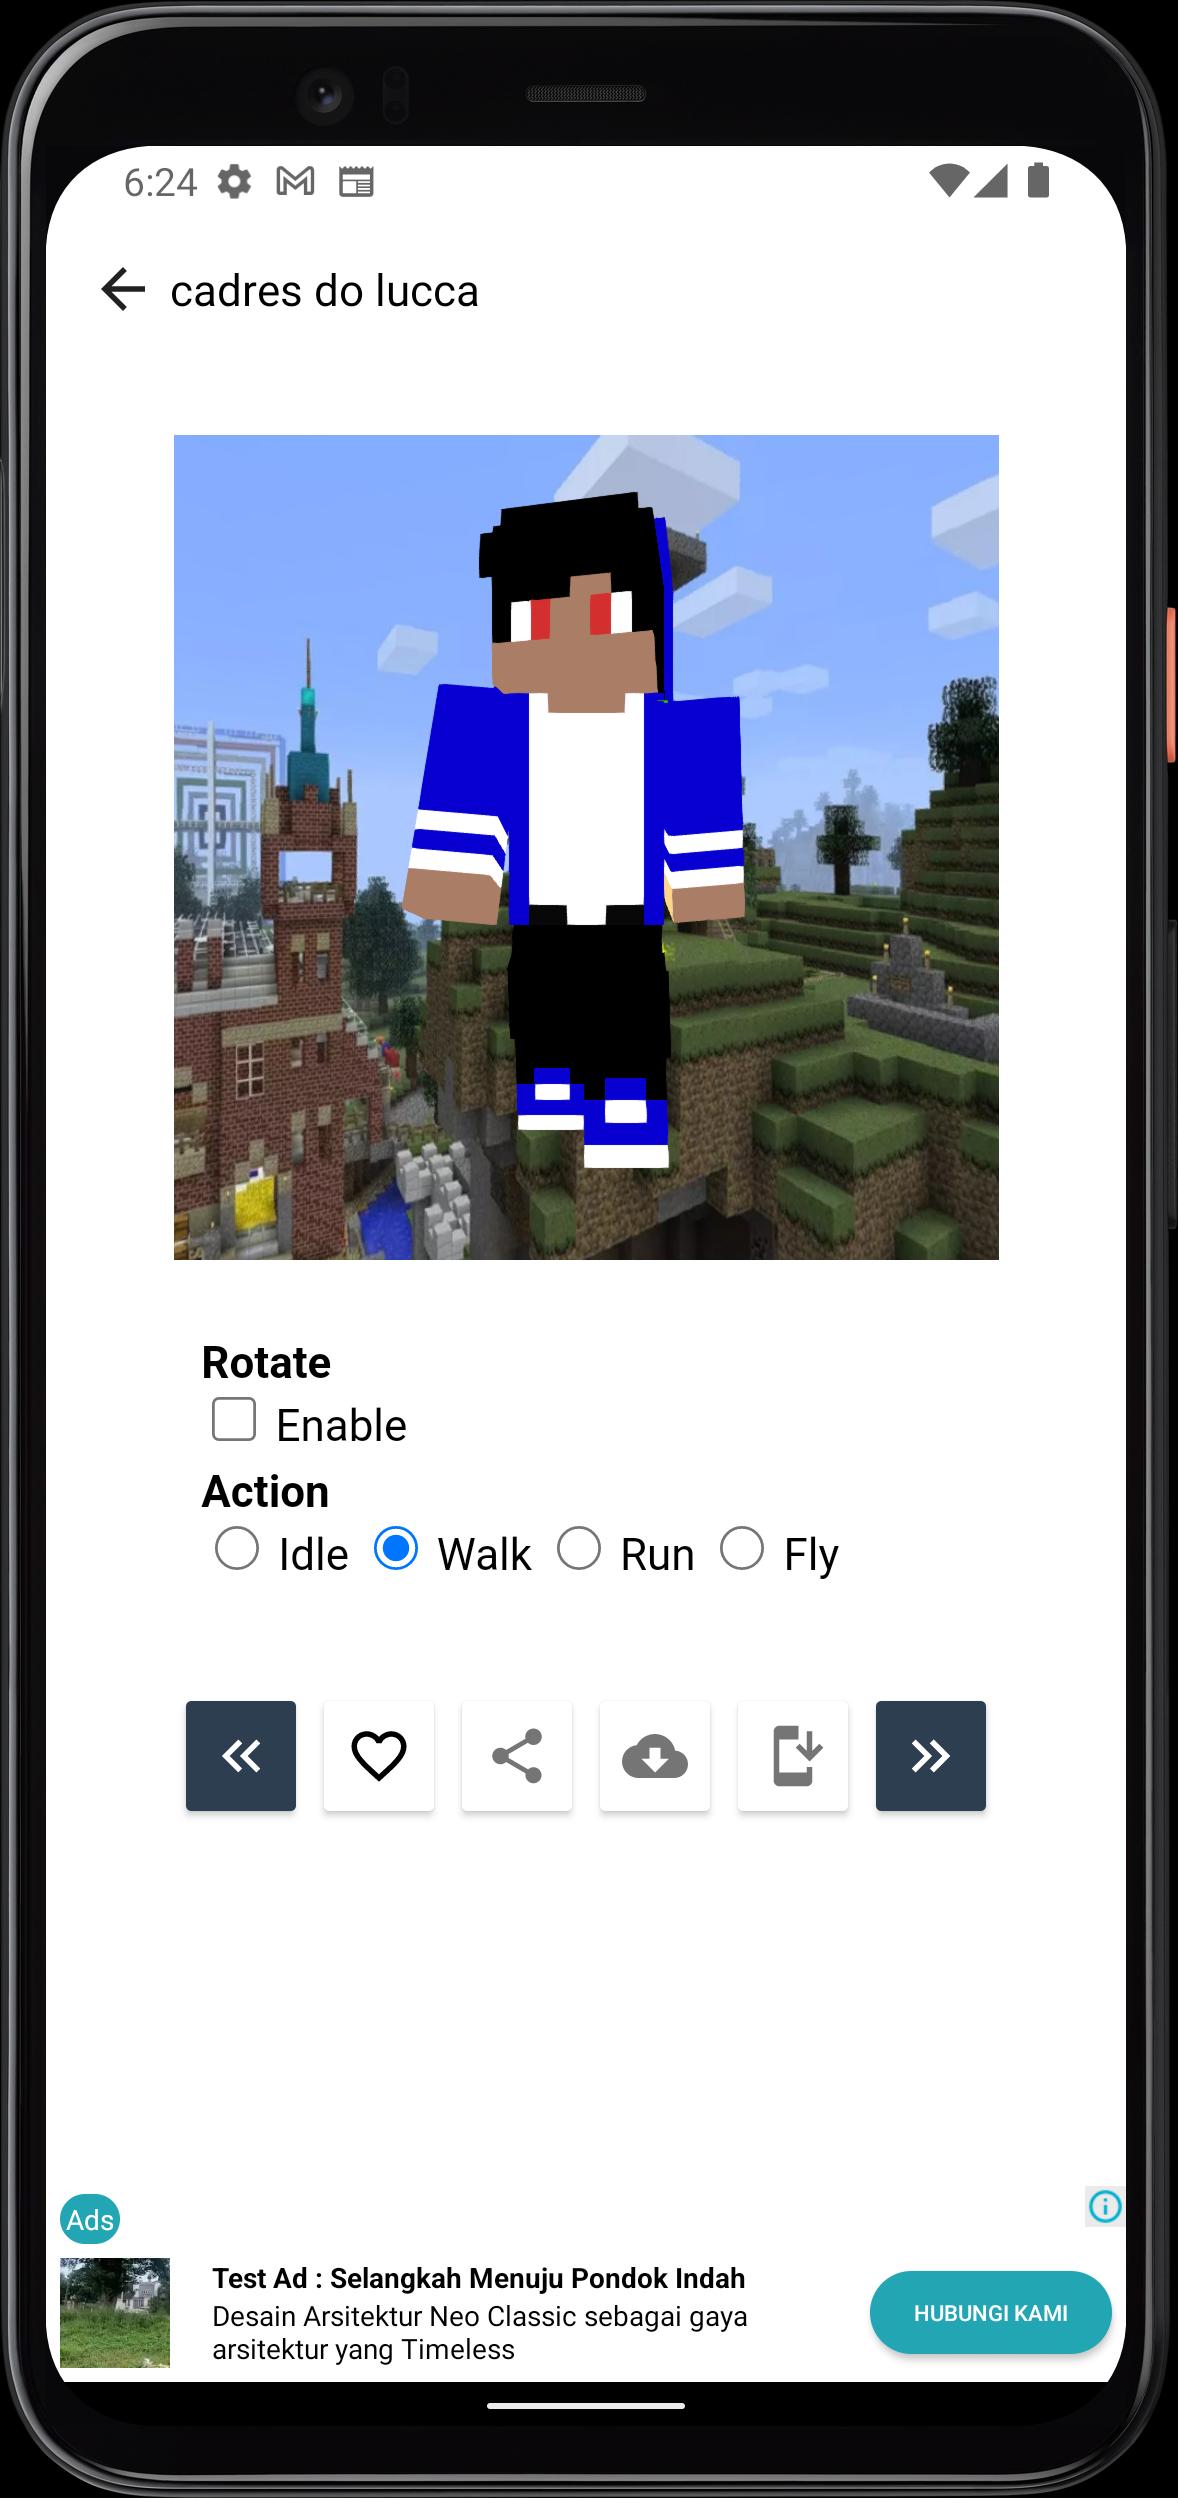 Julia MineGirl Skin for MCPE for Android - Free App Download